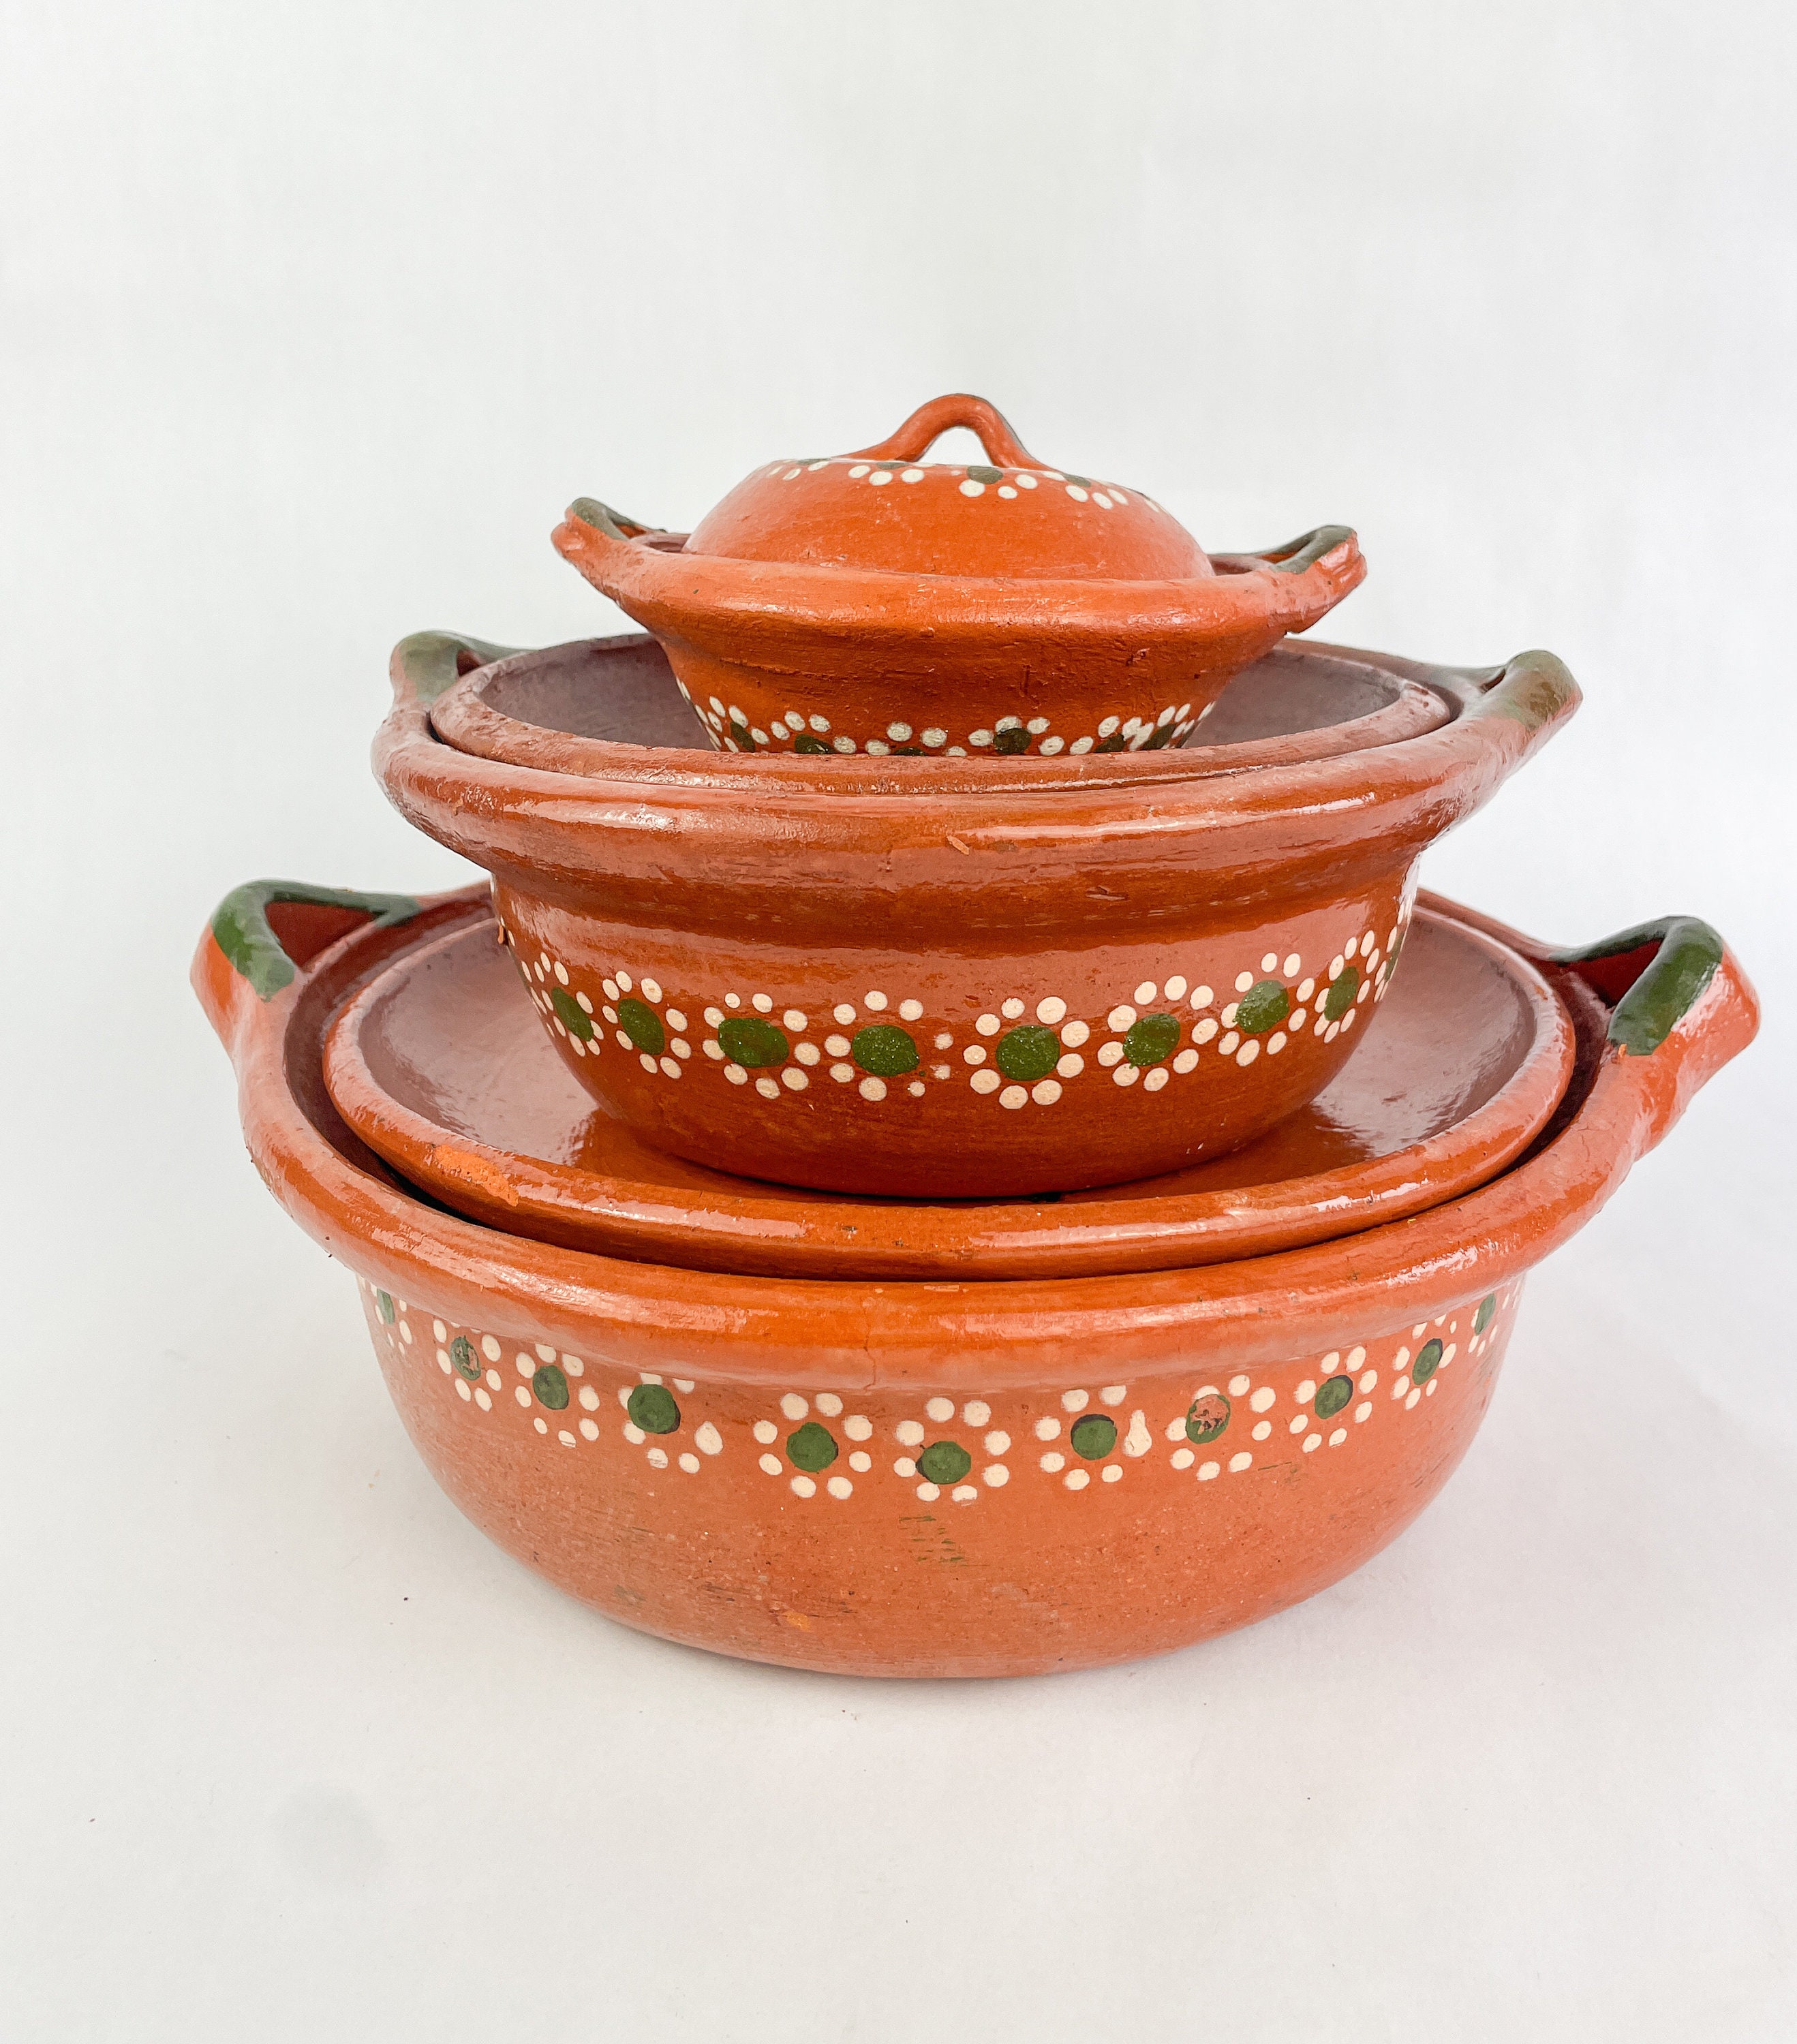 Buy Olla Frijolera De Barro 1.5 Qt. Mini Traditional Handmade Mexican  Authentic Artisan Barro Clay 100% Stockpot with Brown Glaze Interior Finish  Online at Low Prices in India 